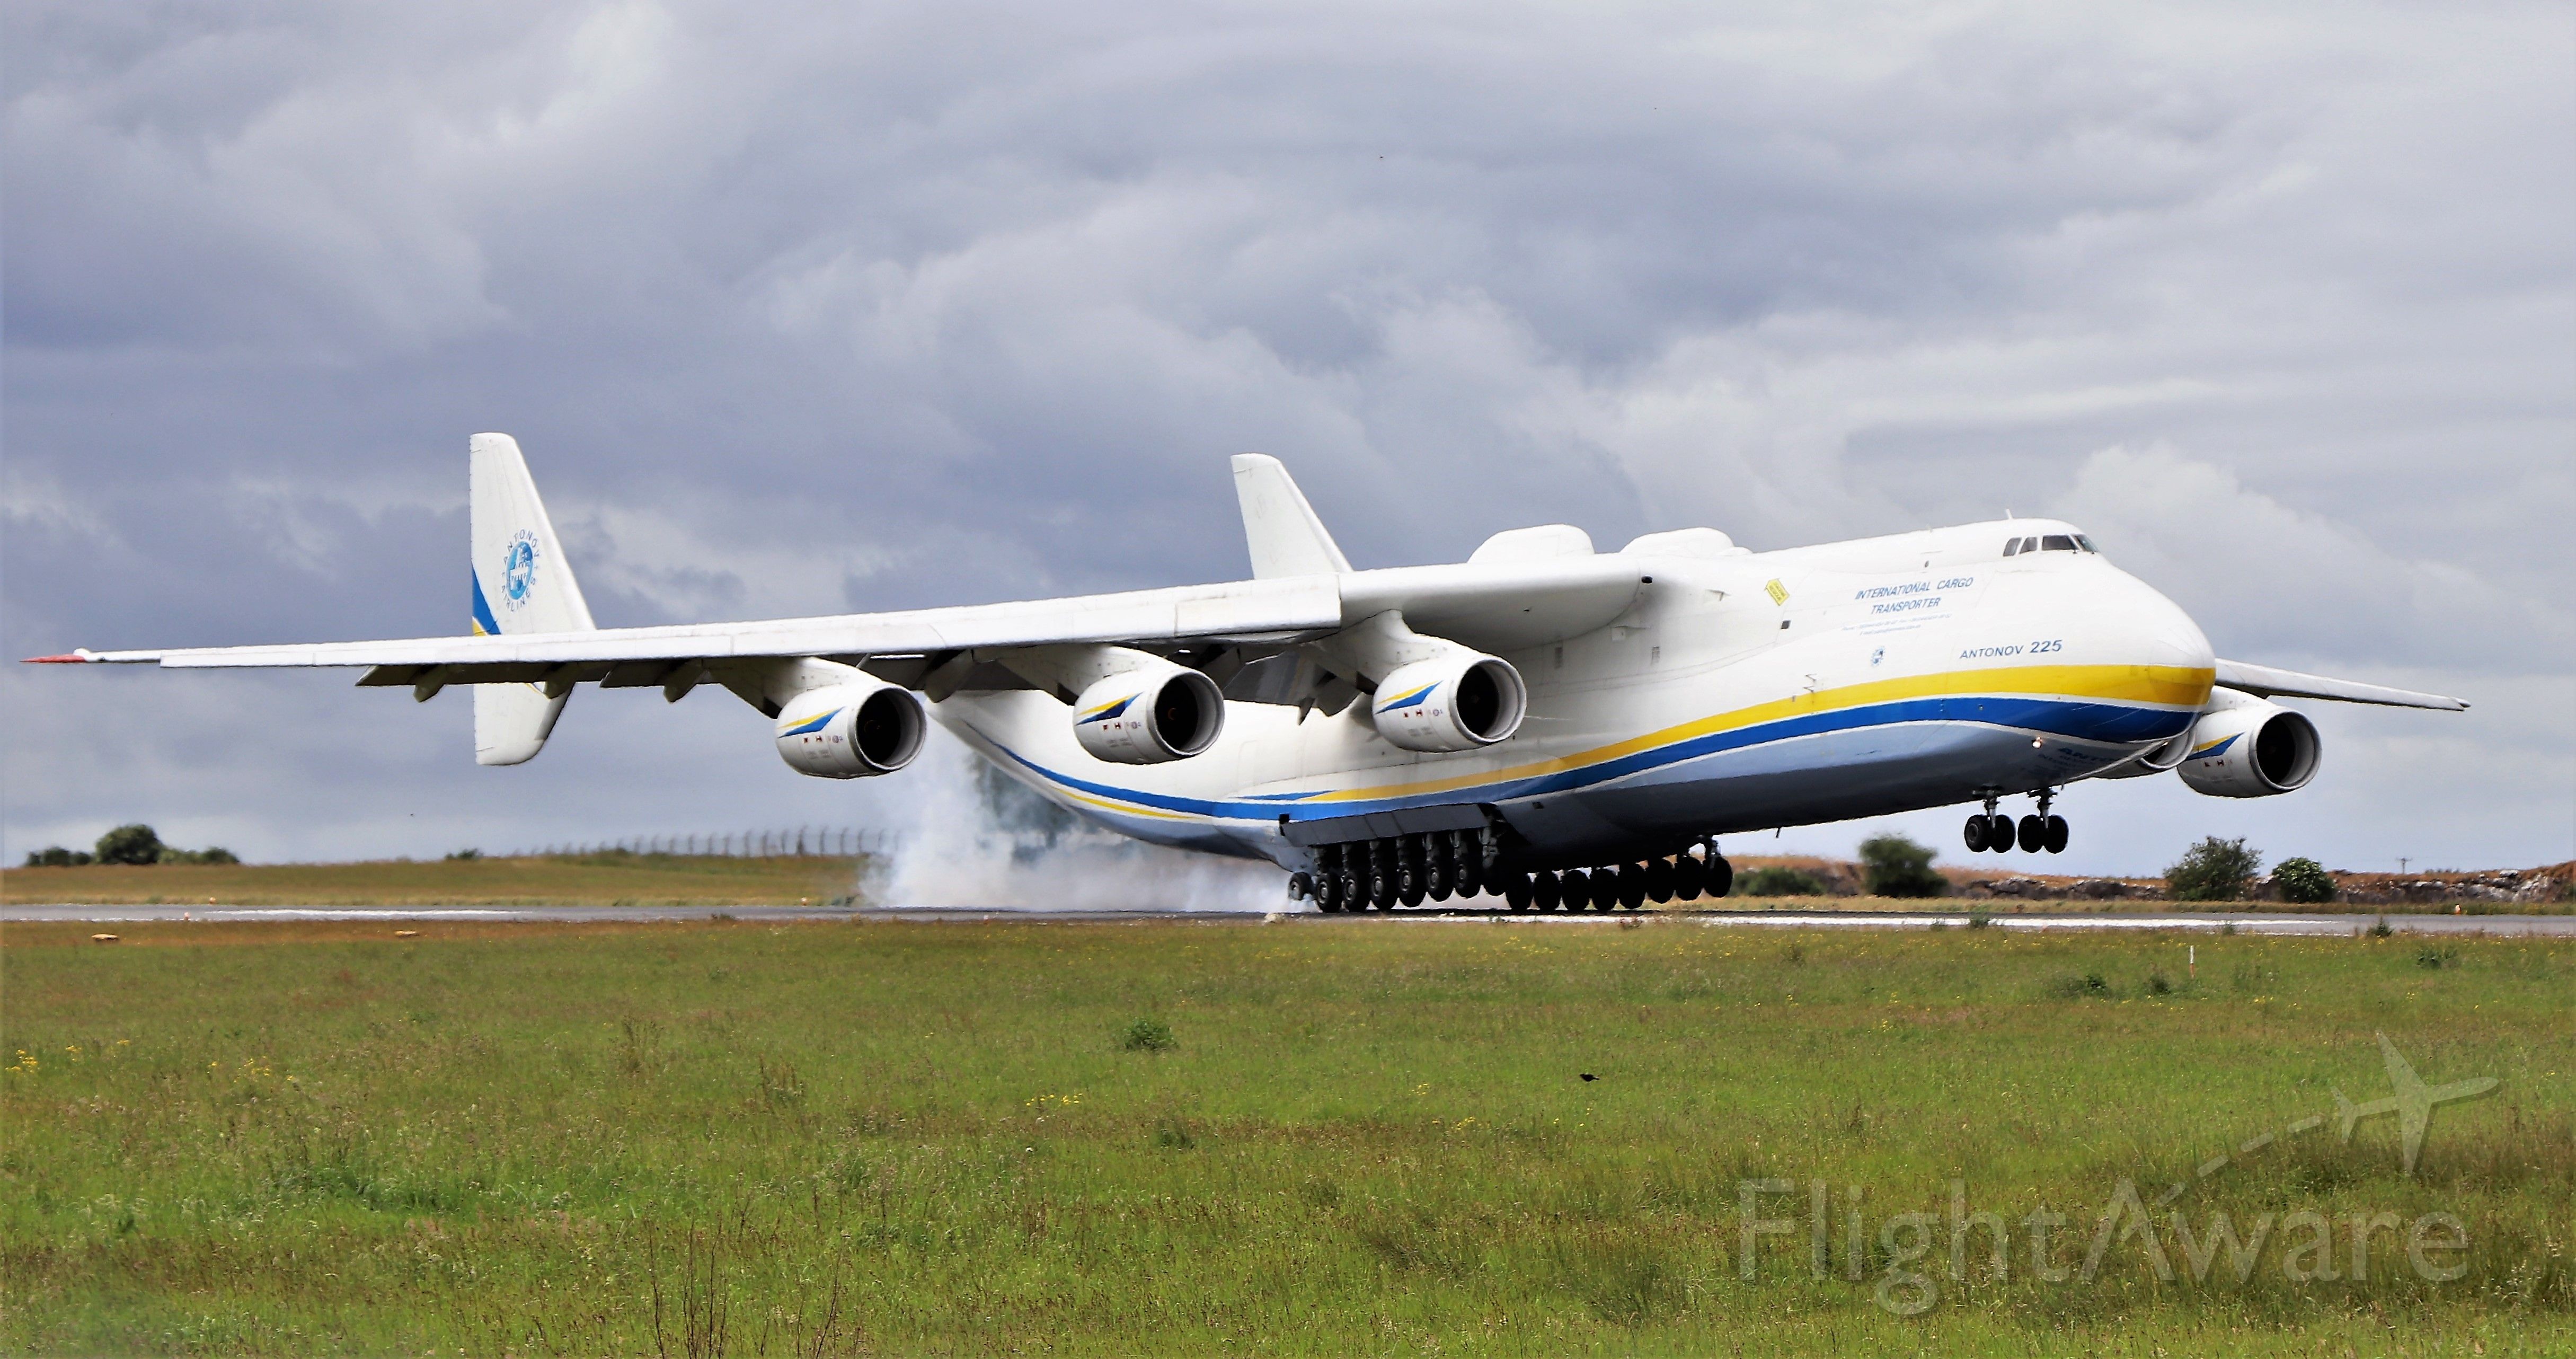 Antonov An-225 Mriya (UR-82060) - an-225 ur-82060 arriving in shannon from china with ppe 10/6/20.